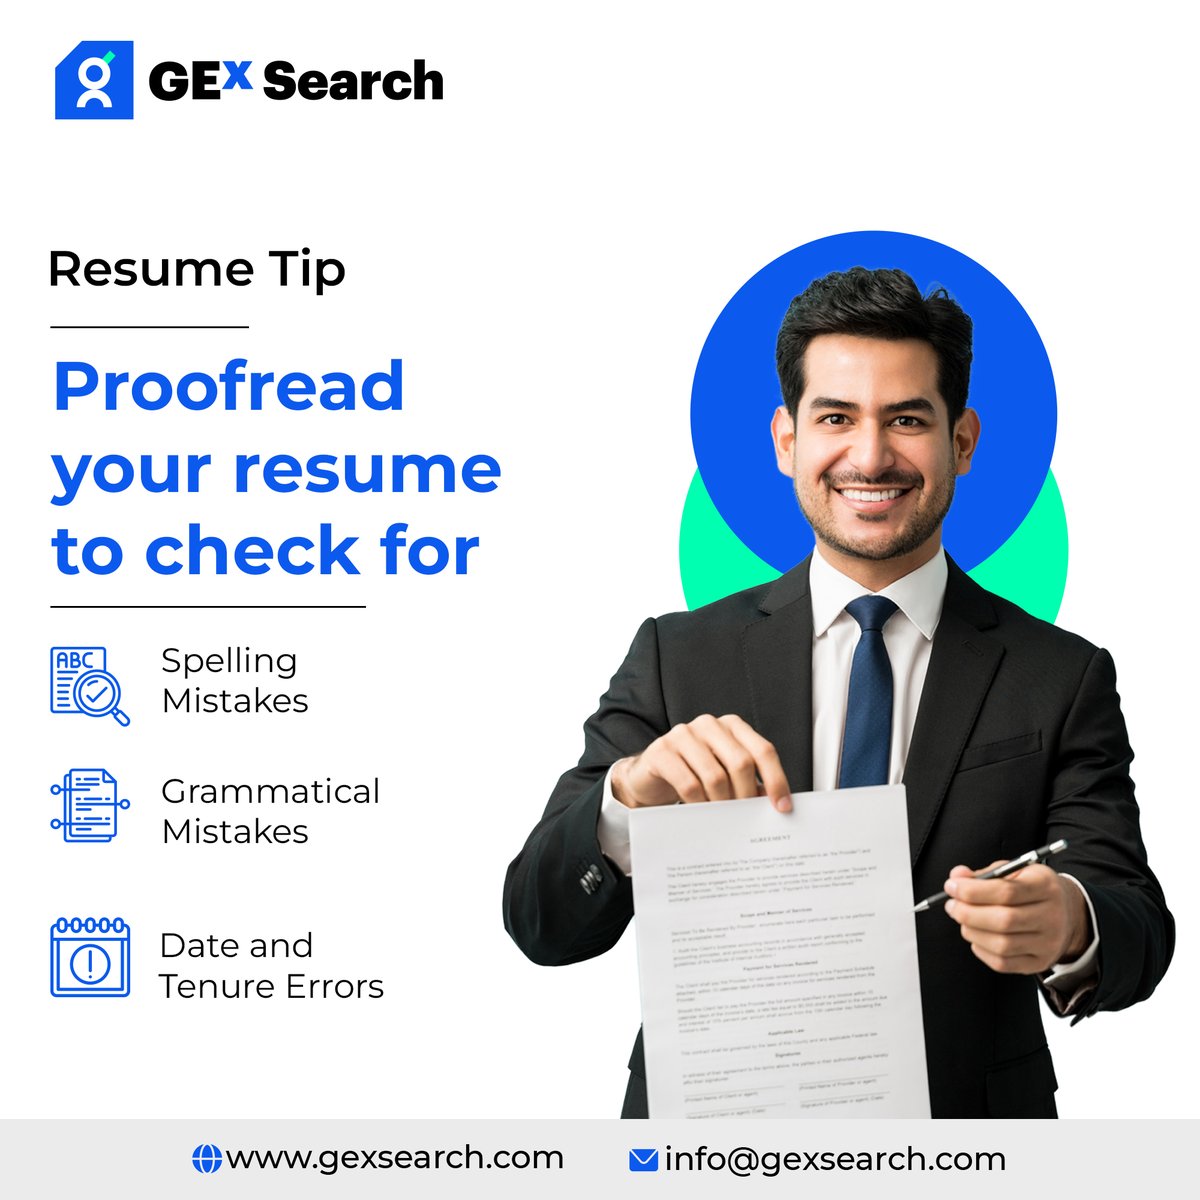 A crisp and error-free resume is your chance to make an impactful first impression. Always proofread your resume and fix the mistakes before an employer points them out. All the best! 
.
.
.
#onlineourses #offlinecourses #learningnewskills #upskillingcourses #careerchange #GEx